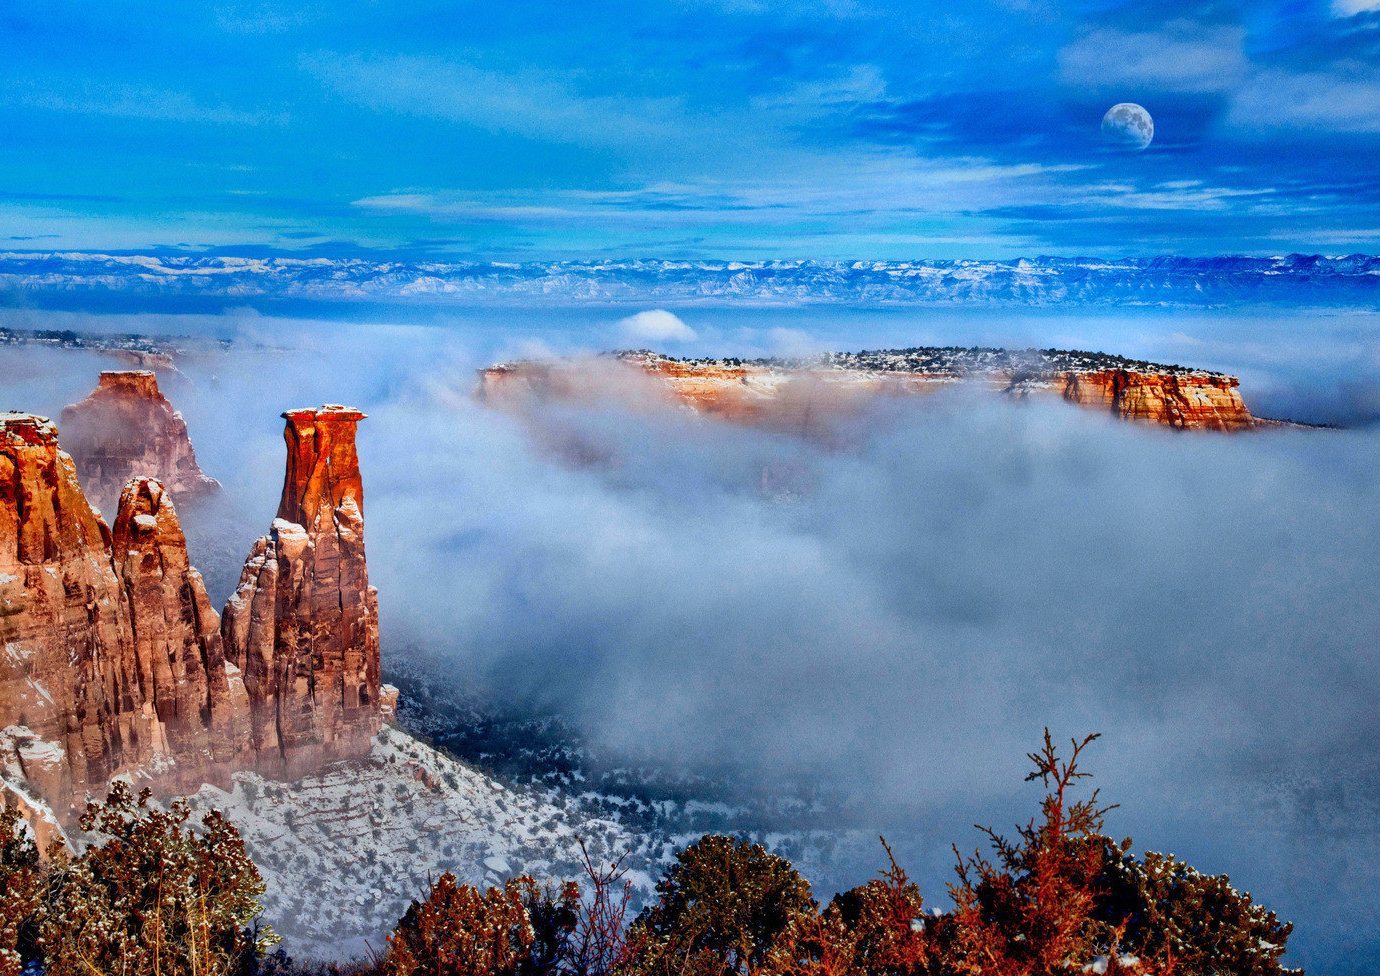 Countryside Landmarks national park Natural wonders Nature Offbeat Scenic views western sky outdoor geological phenomenon canyon cloud reflection morning landscape mountain Coast Sea dusk dawn clouds colored